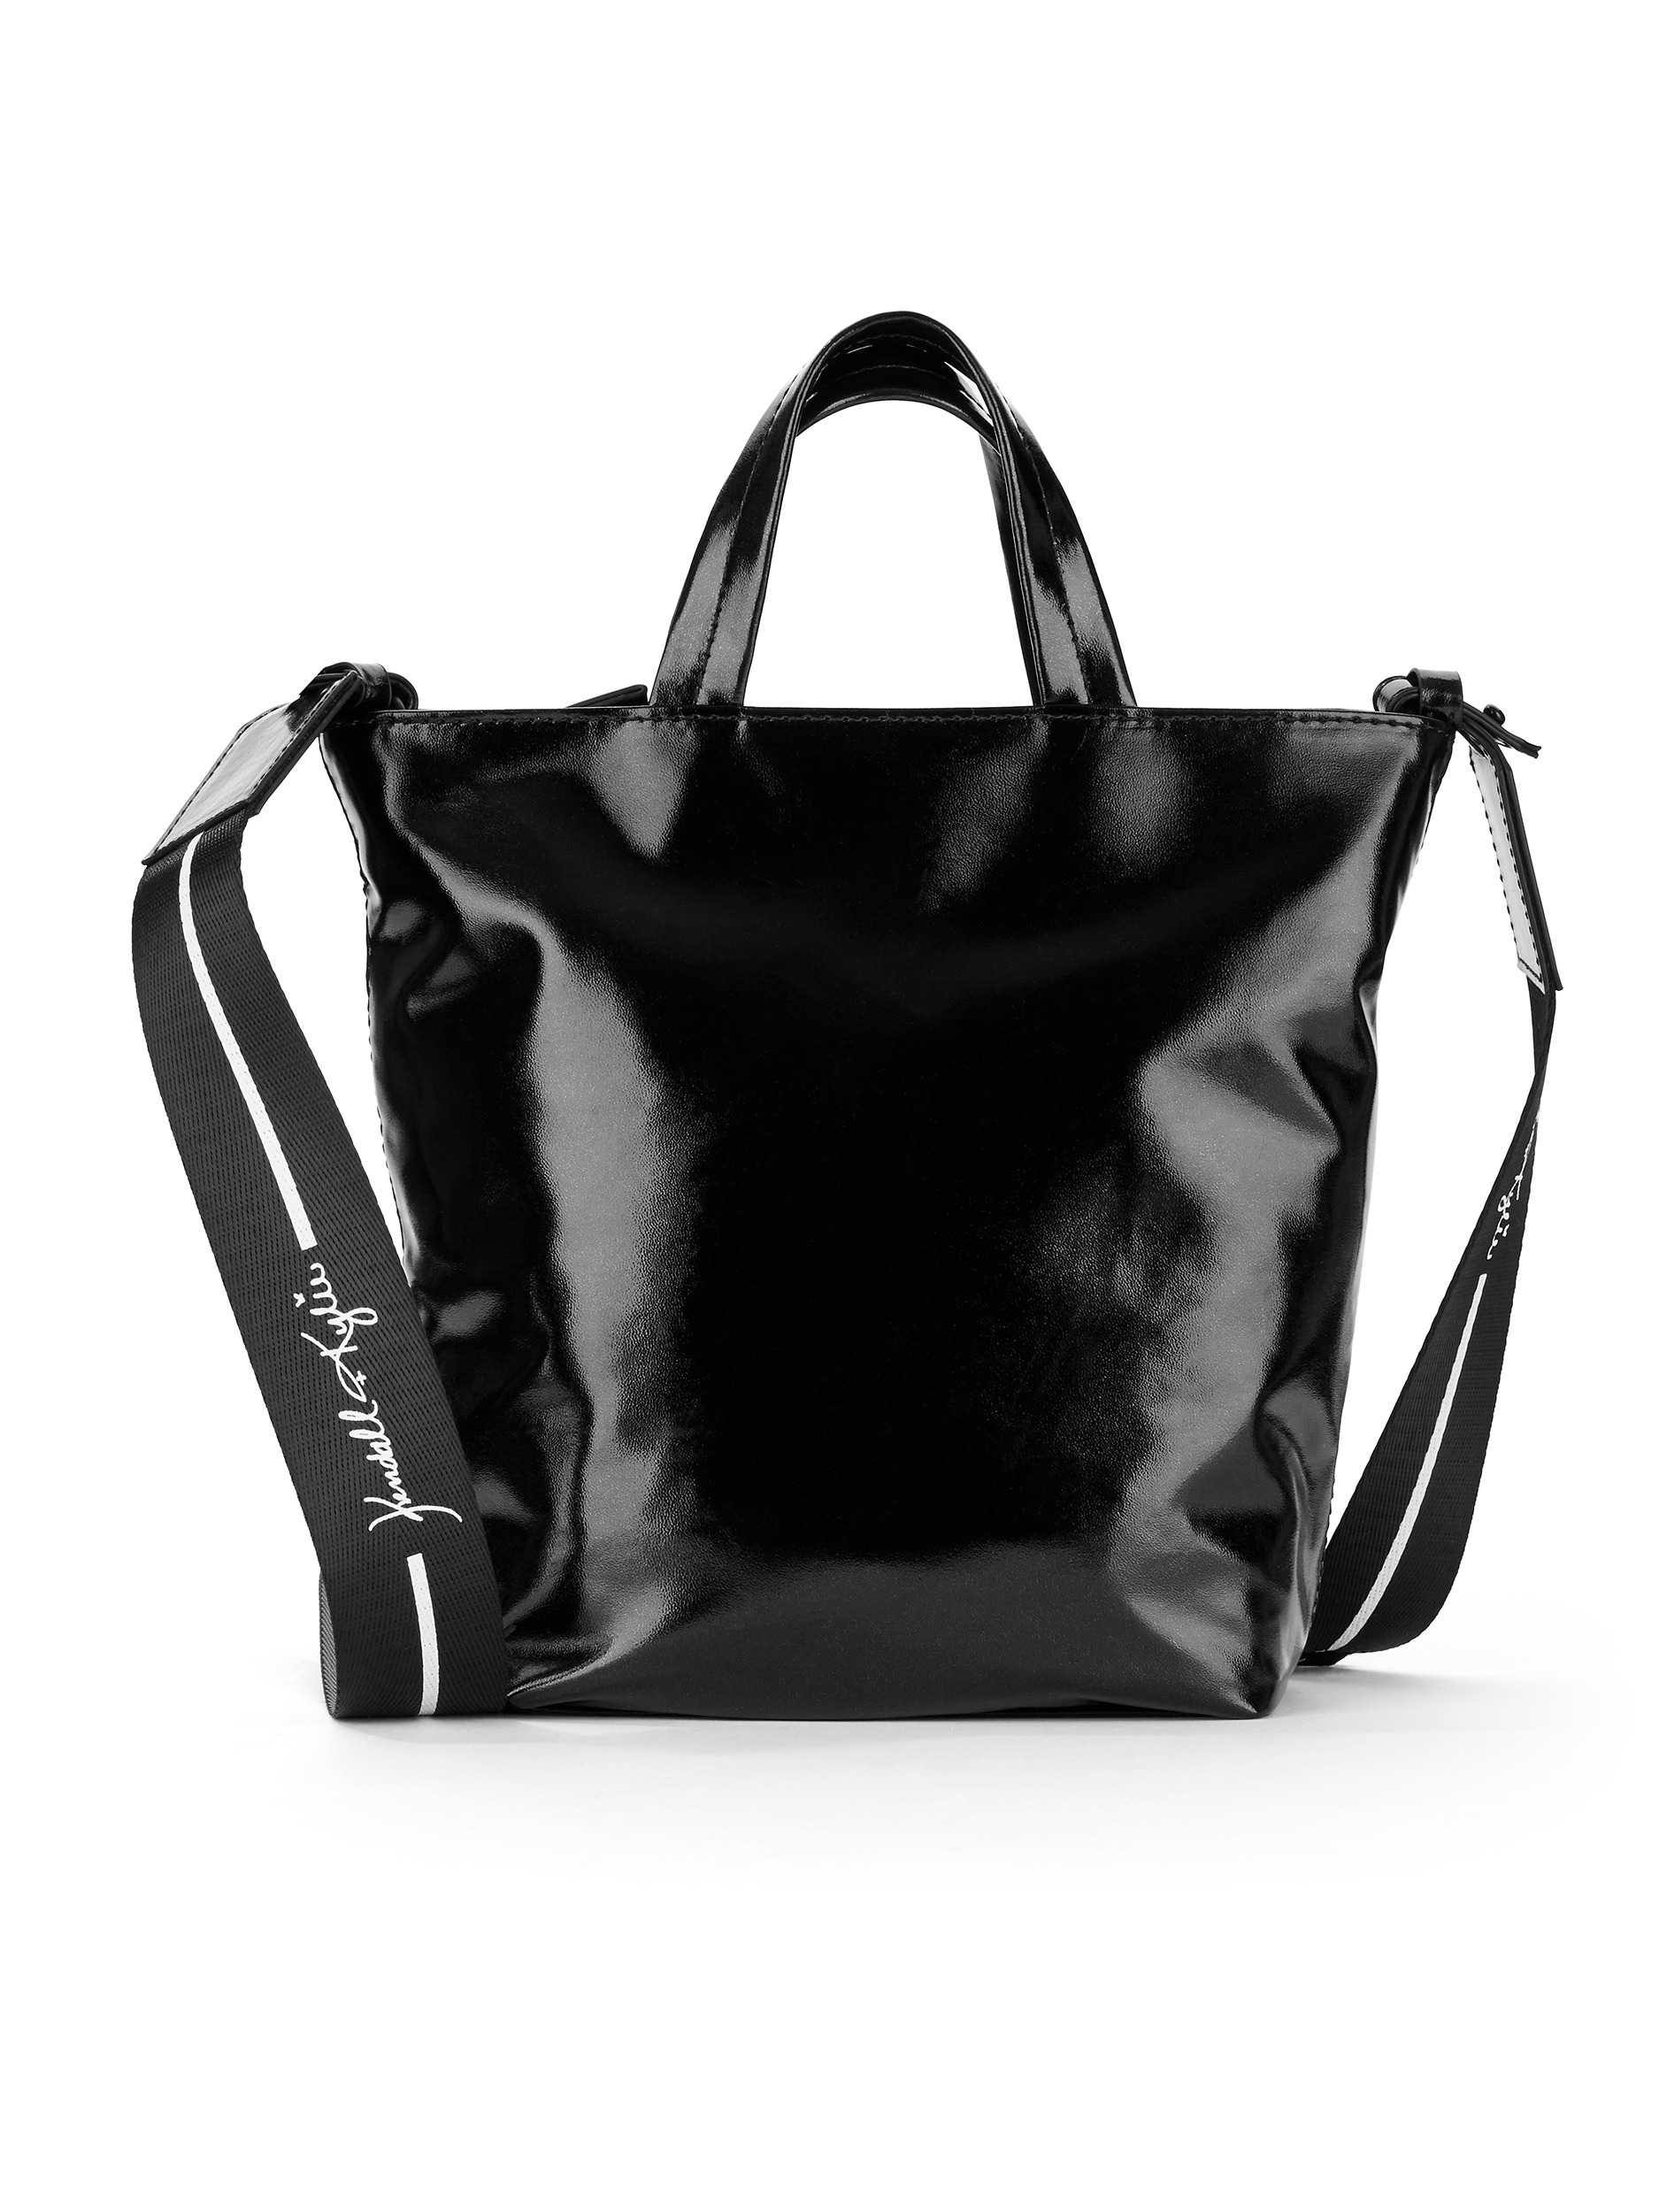 Kendall + Kylie for Walmart Black Mini Tote Crossbody - image 5 of 5